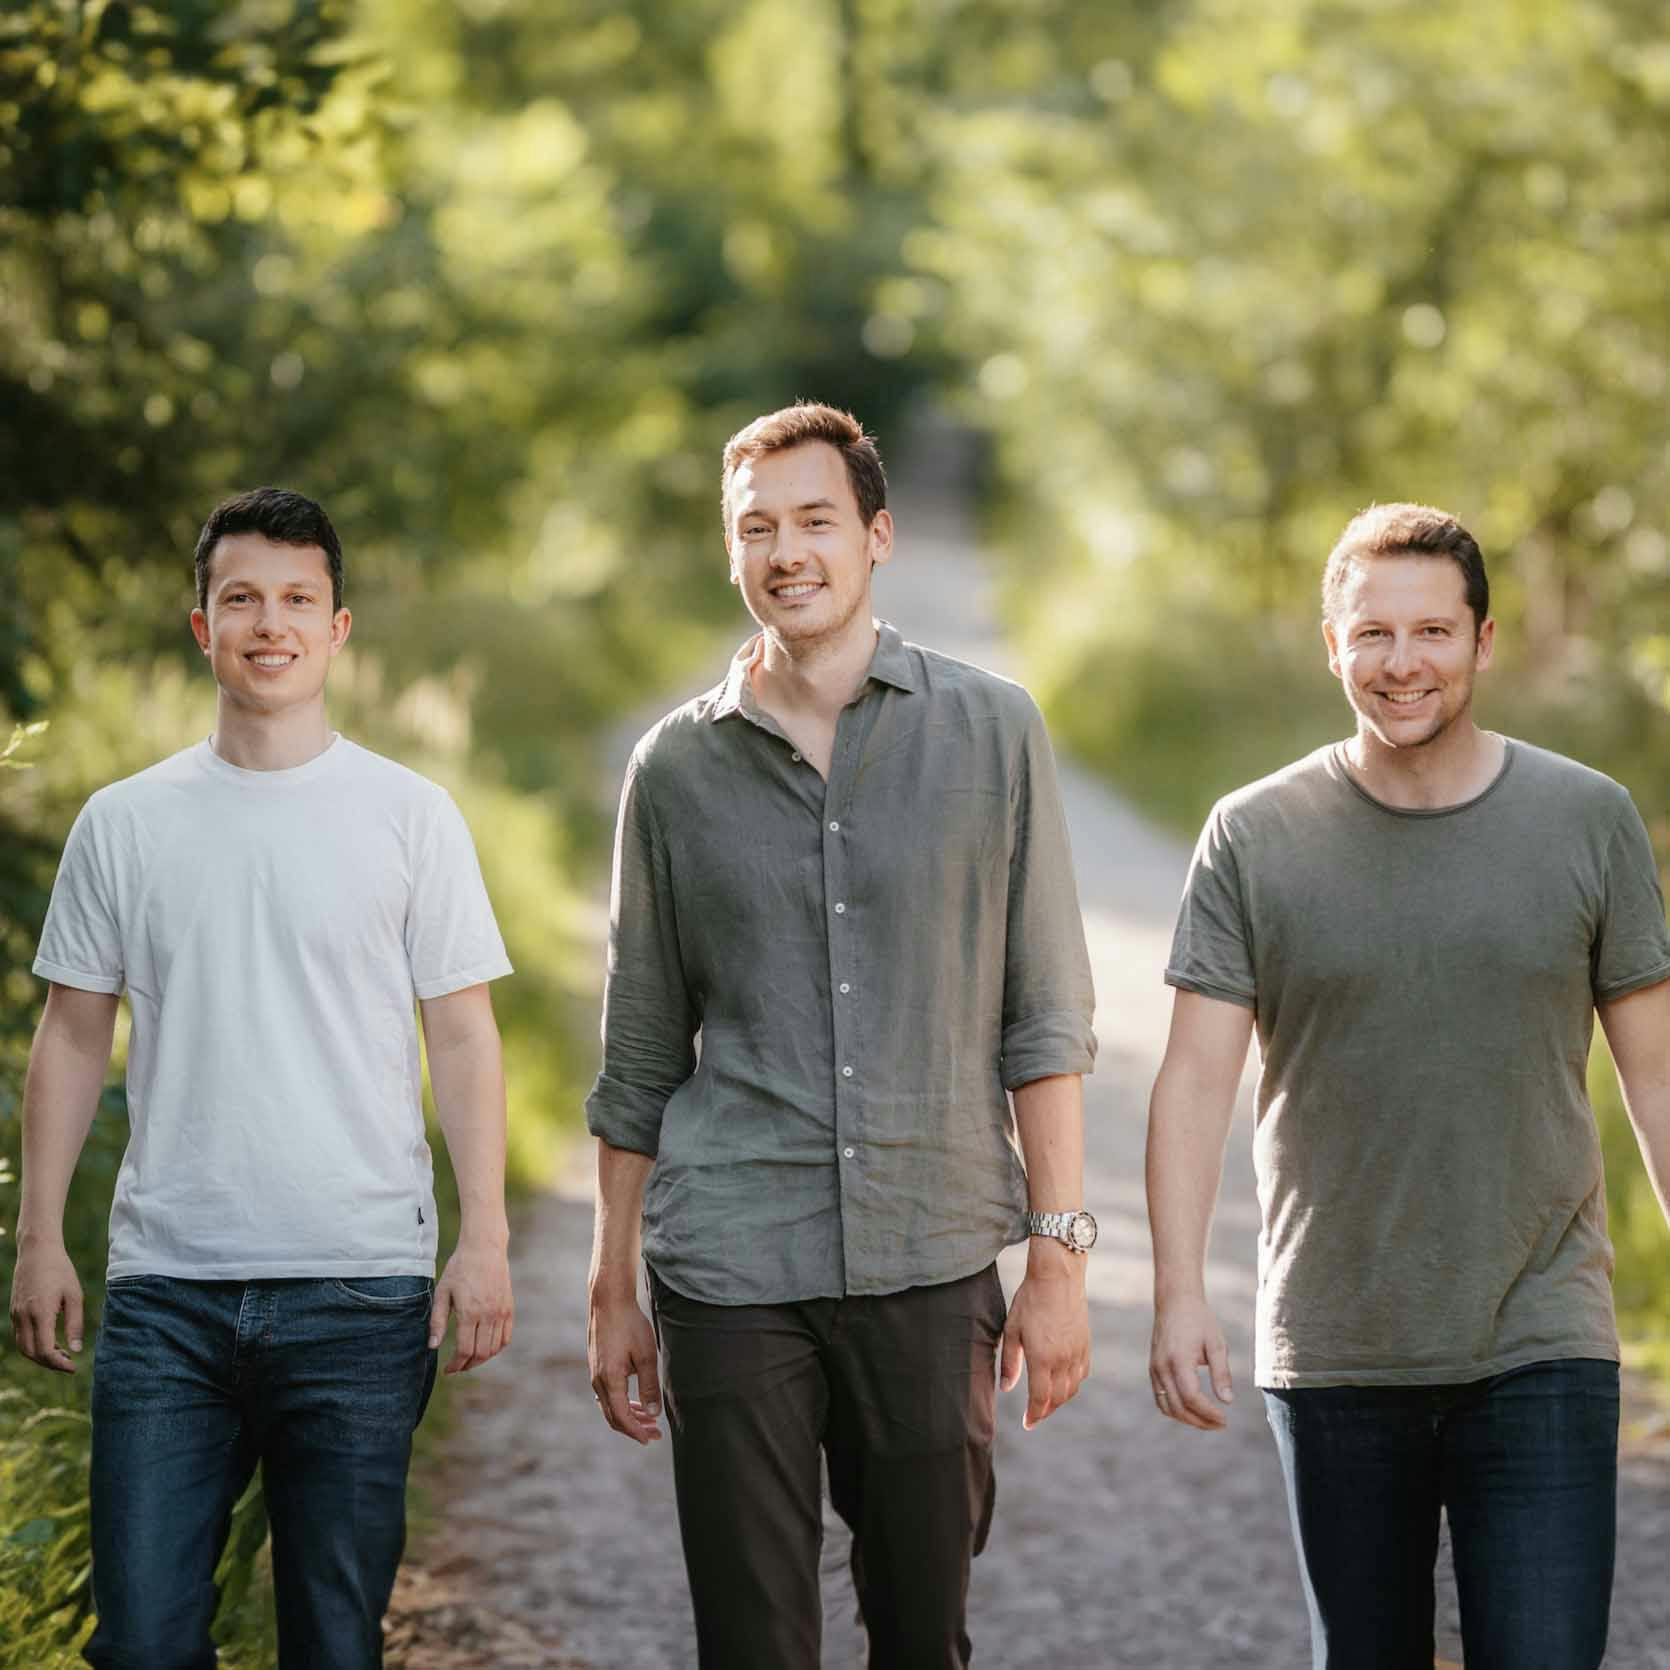 An image showing the three founders of OCELL. From left to right: Felix Horvard, Christian Decher and David Dohmen walking in a forest.